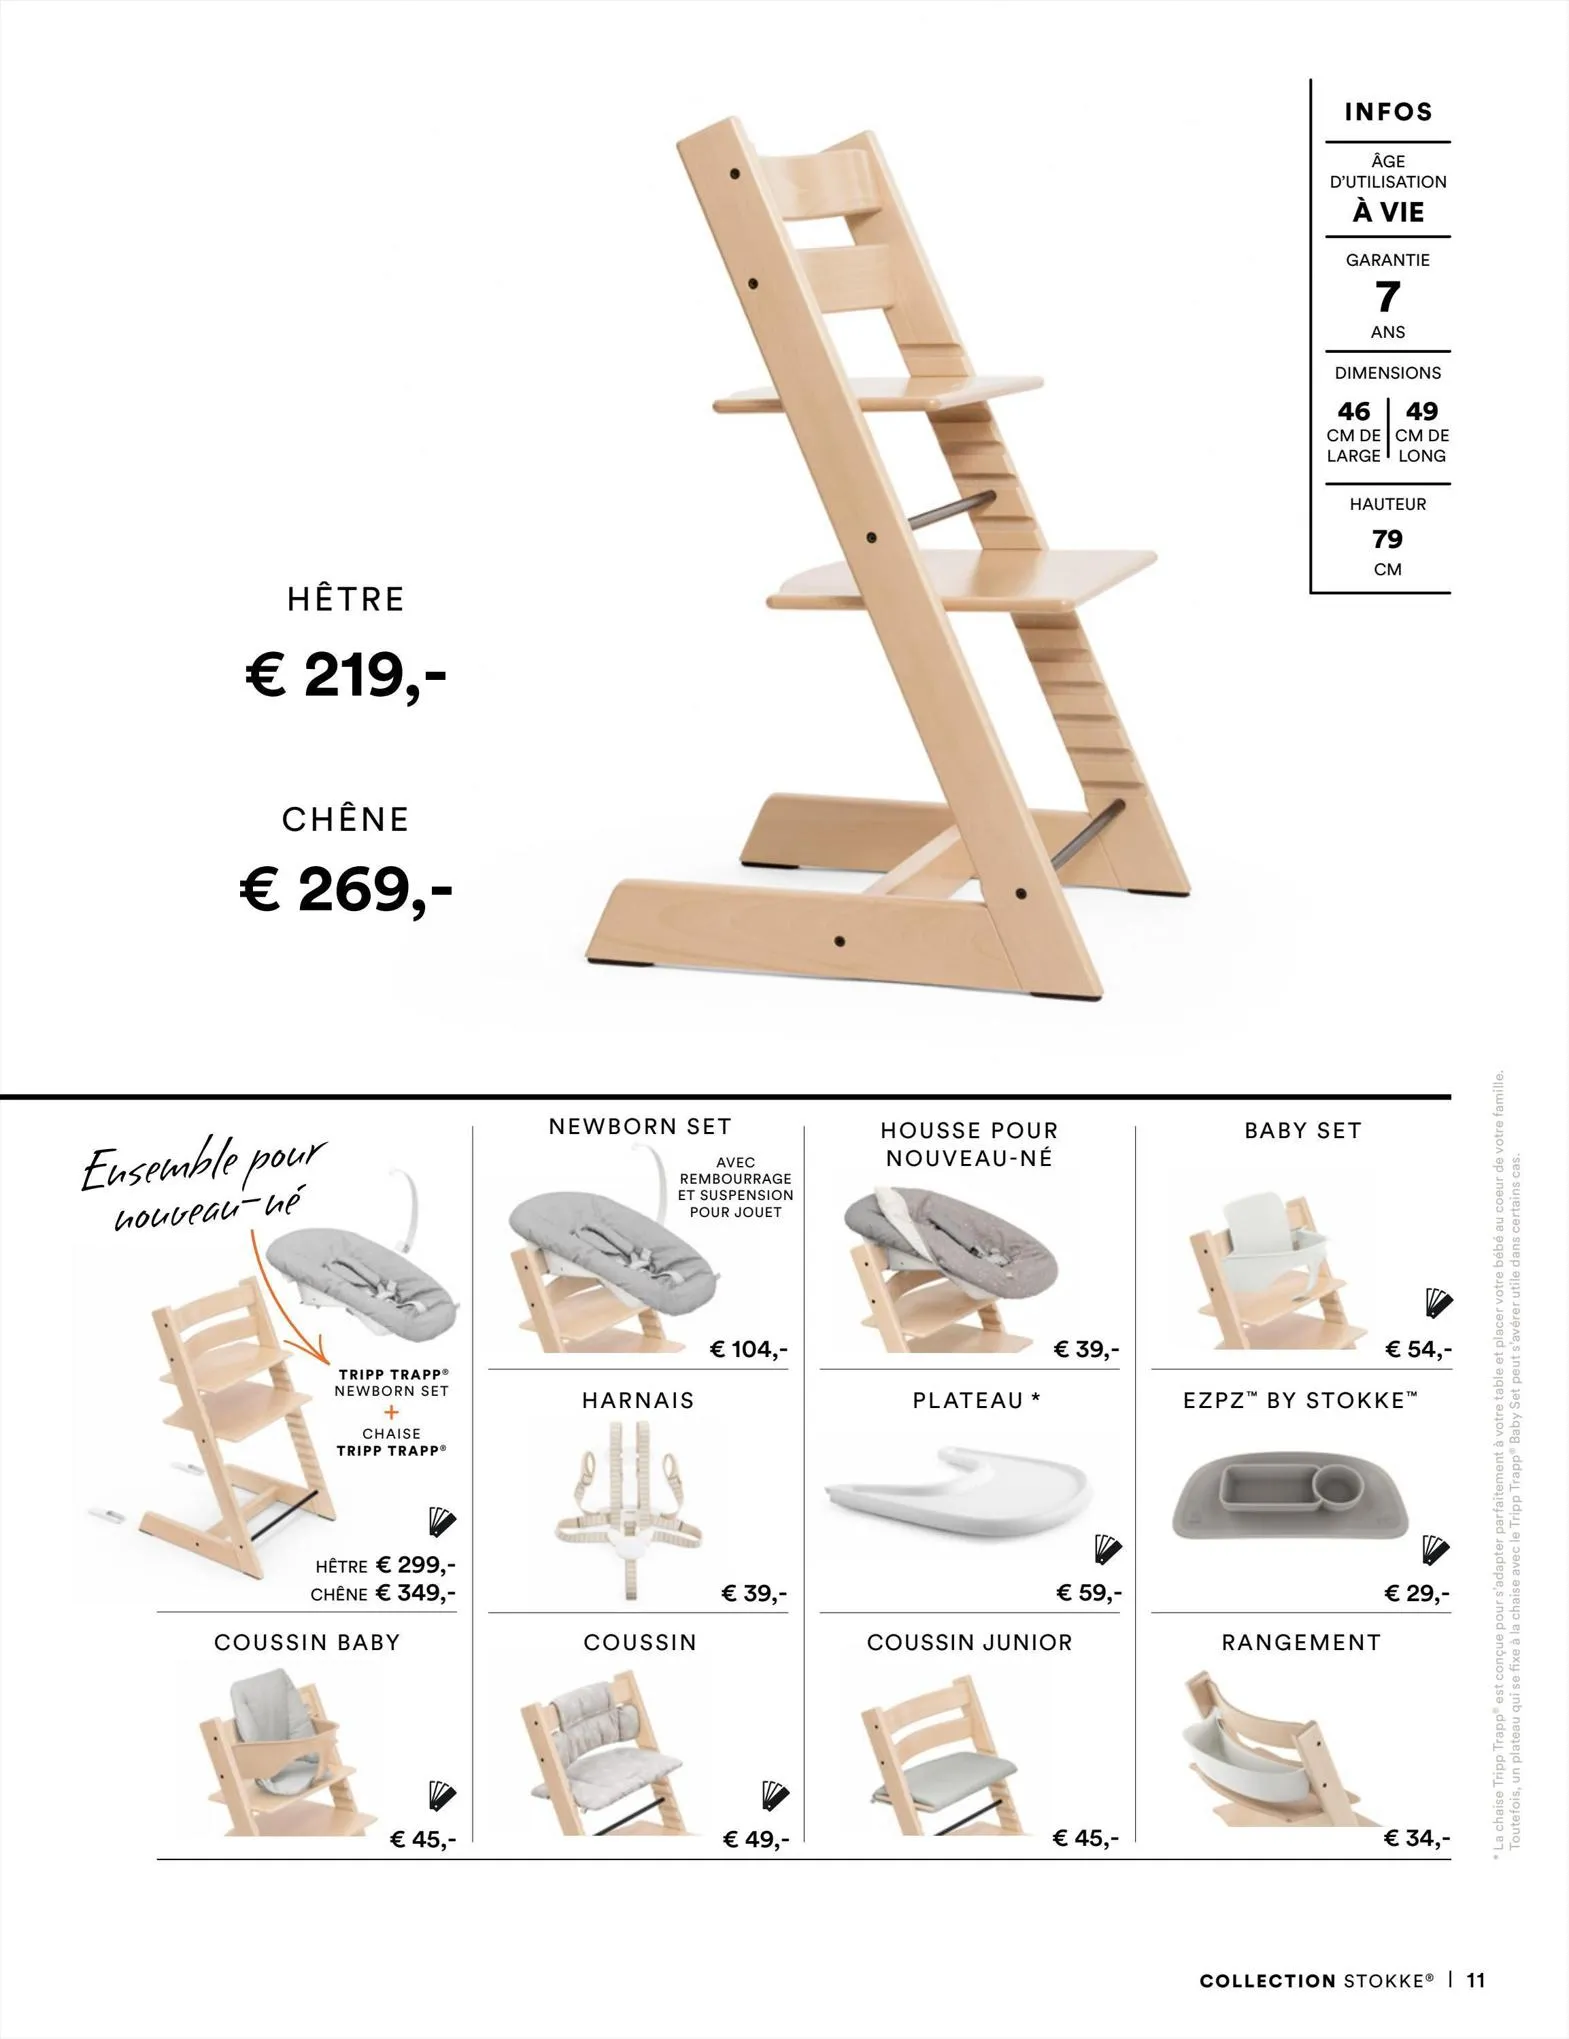 Catalogue Stokke Consumer Guide - French, page 00011